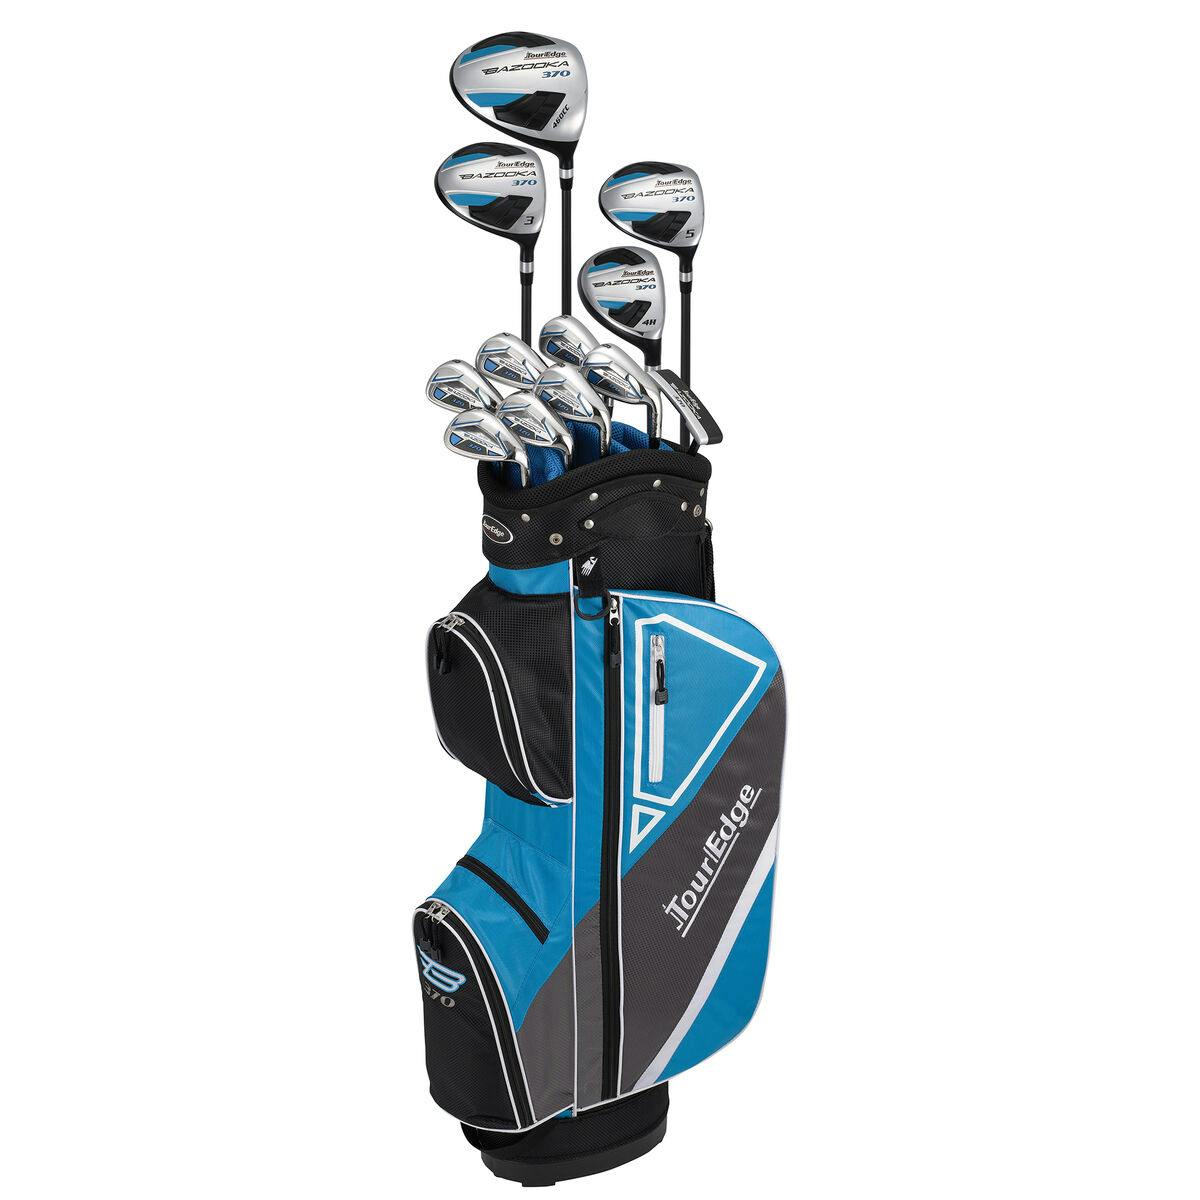 Tour Edge Bazooka 370 Complete Set with Stand Bag · Right handed · Steel · Uniflex · Standard · Black/Blue